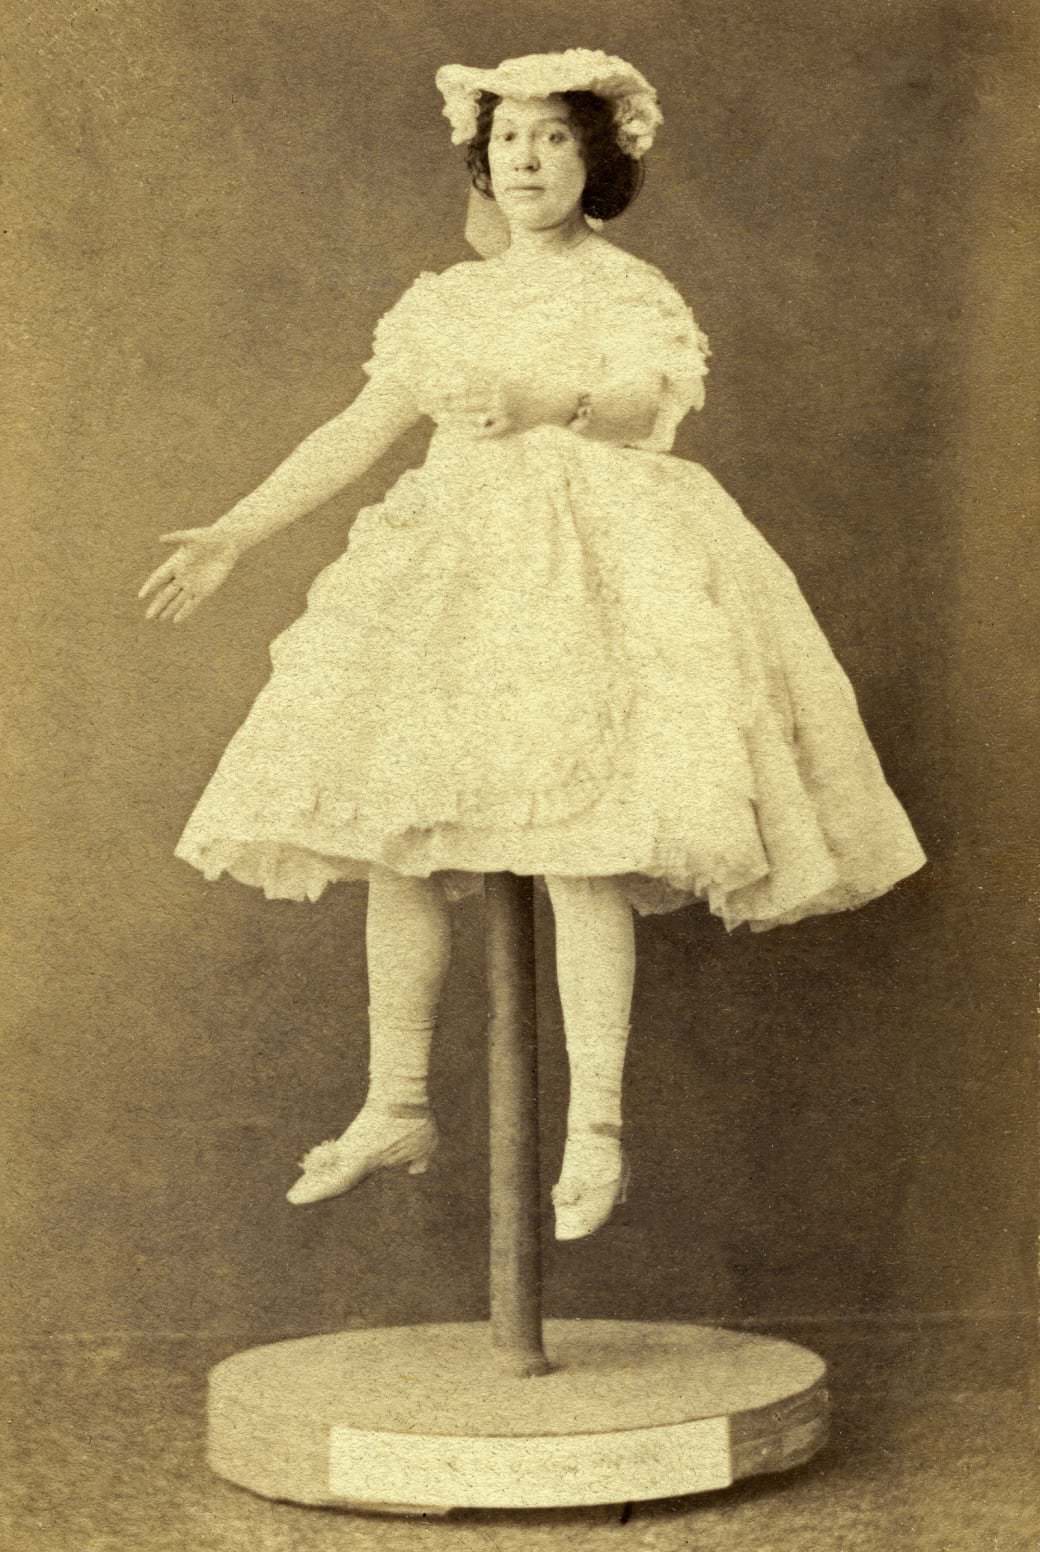 And this woman who decided she’d prefer to be a doll herself in 1865